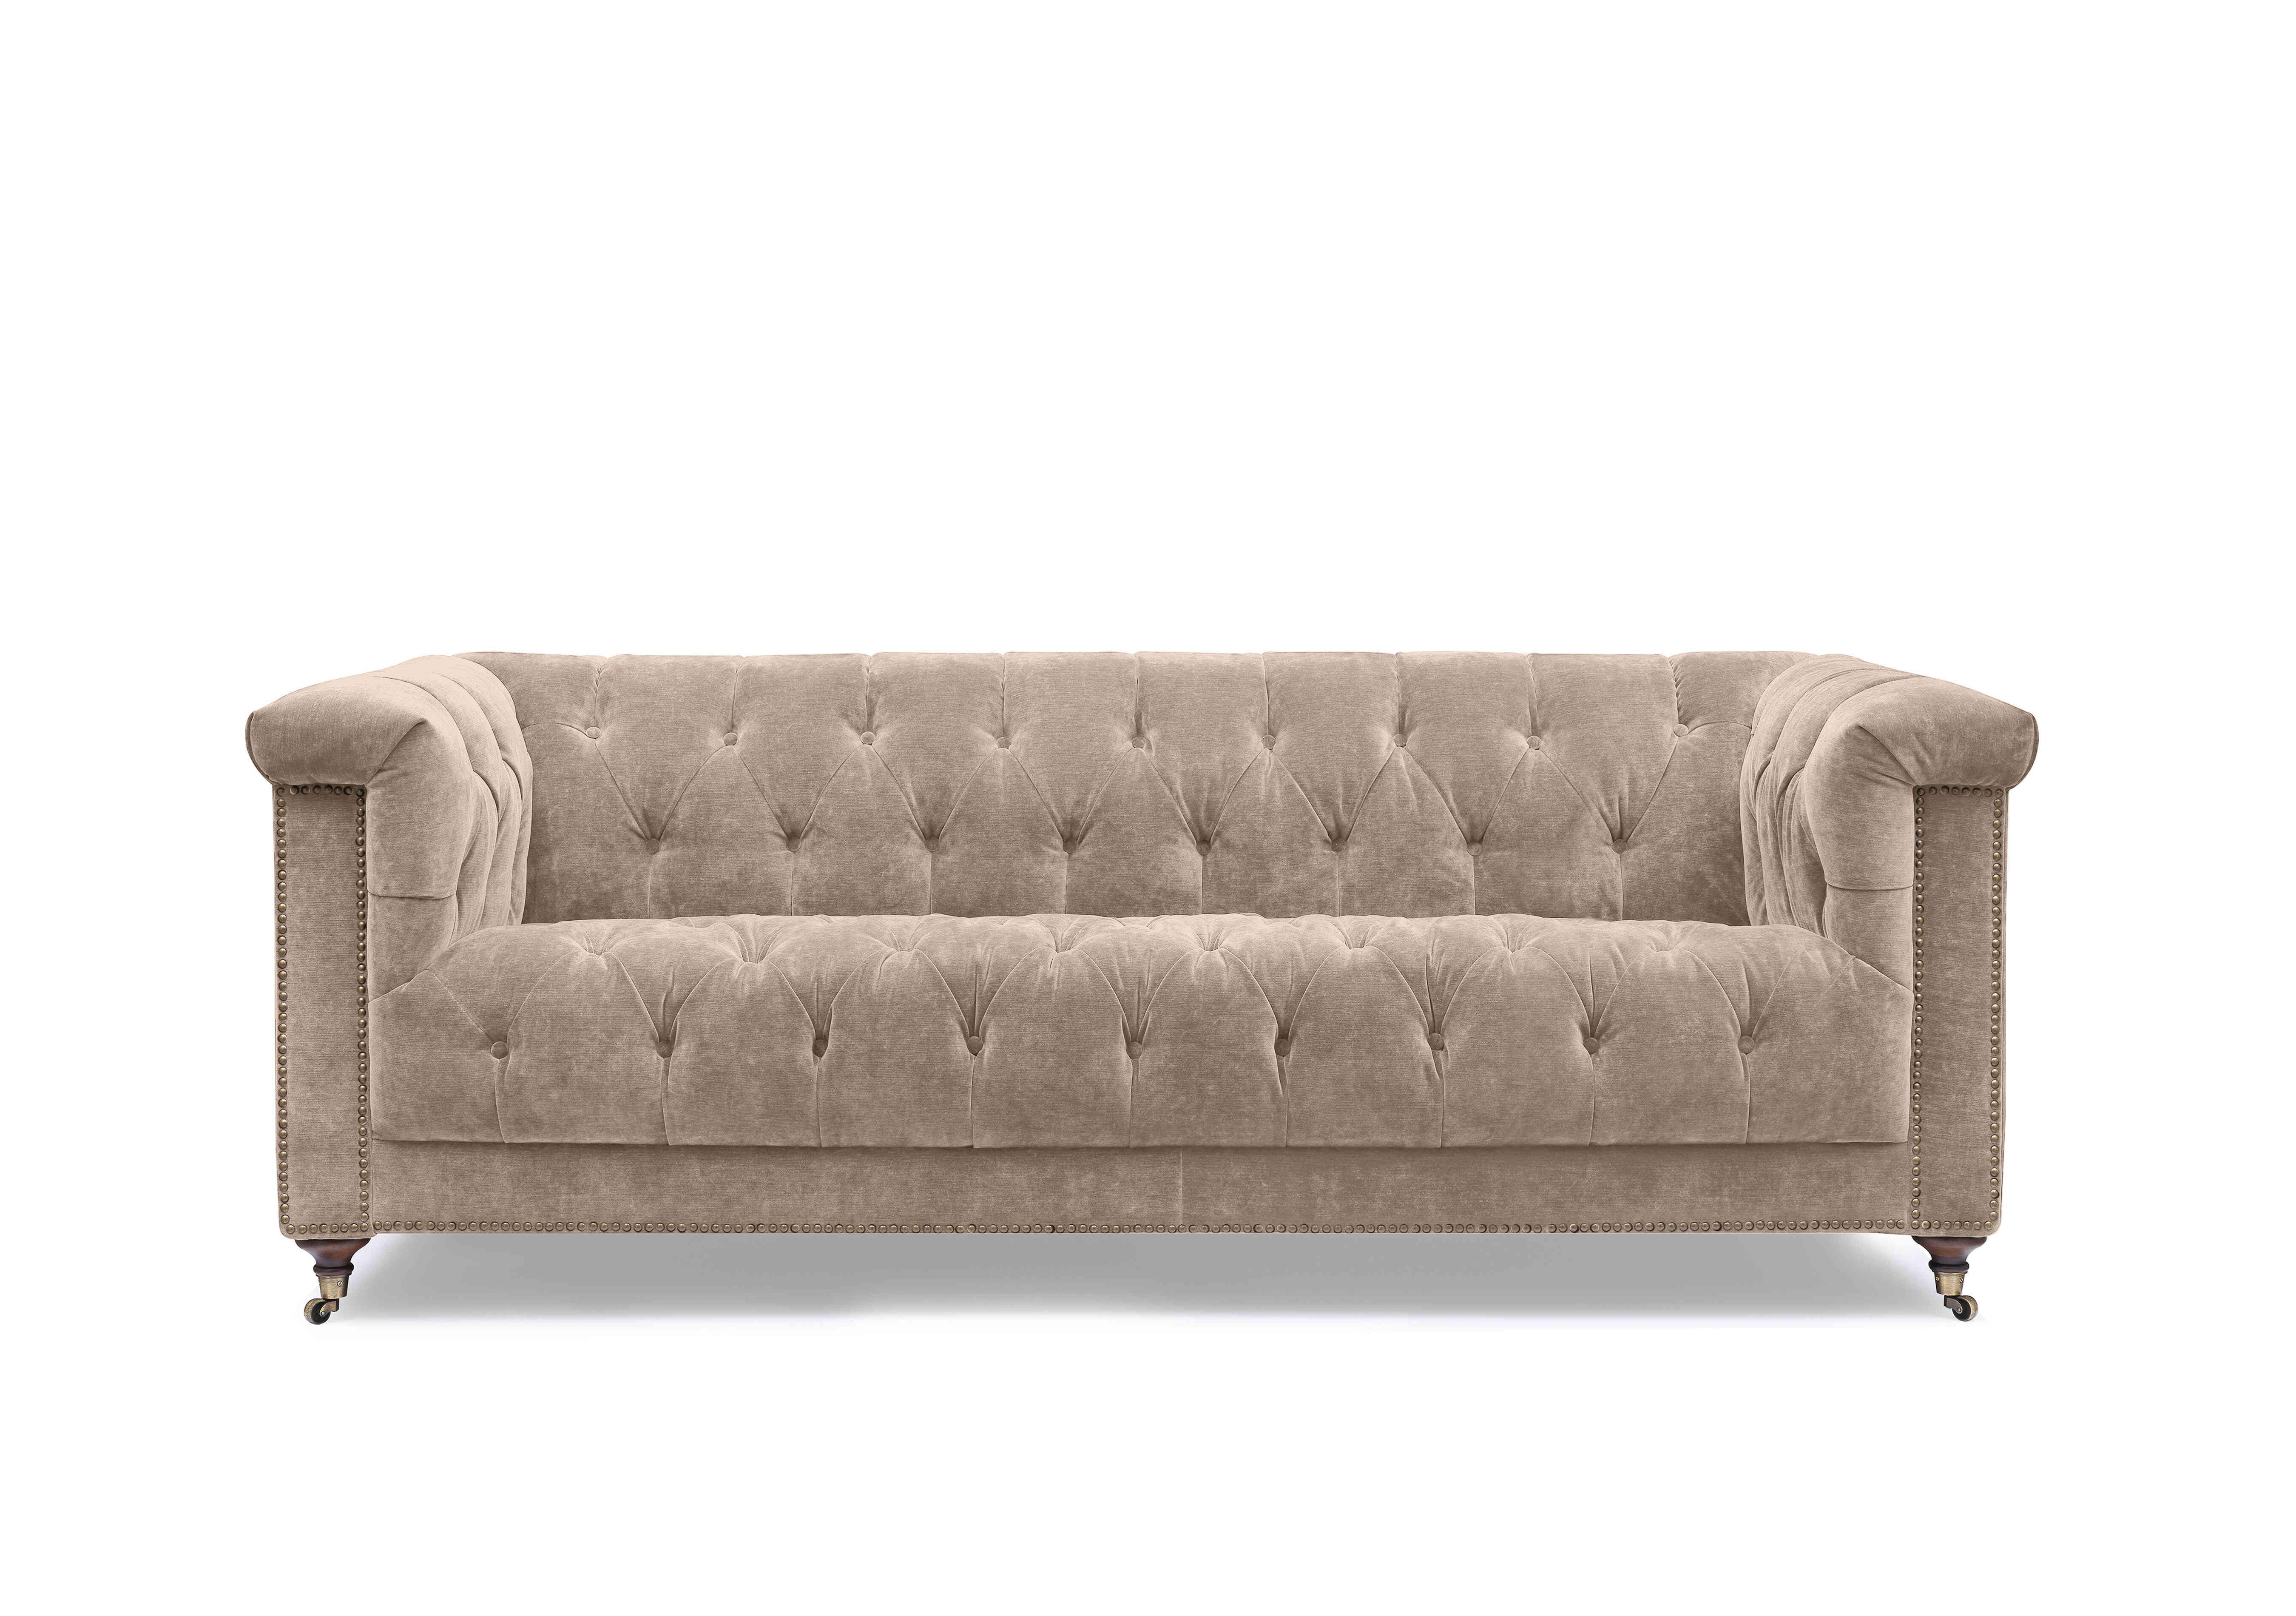 Wallace 3 Seater Fabric Chesterfield Sofa in X3y1-W022 Barley on Furniture Village